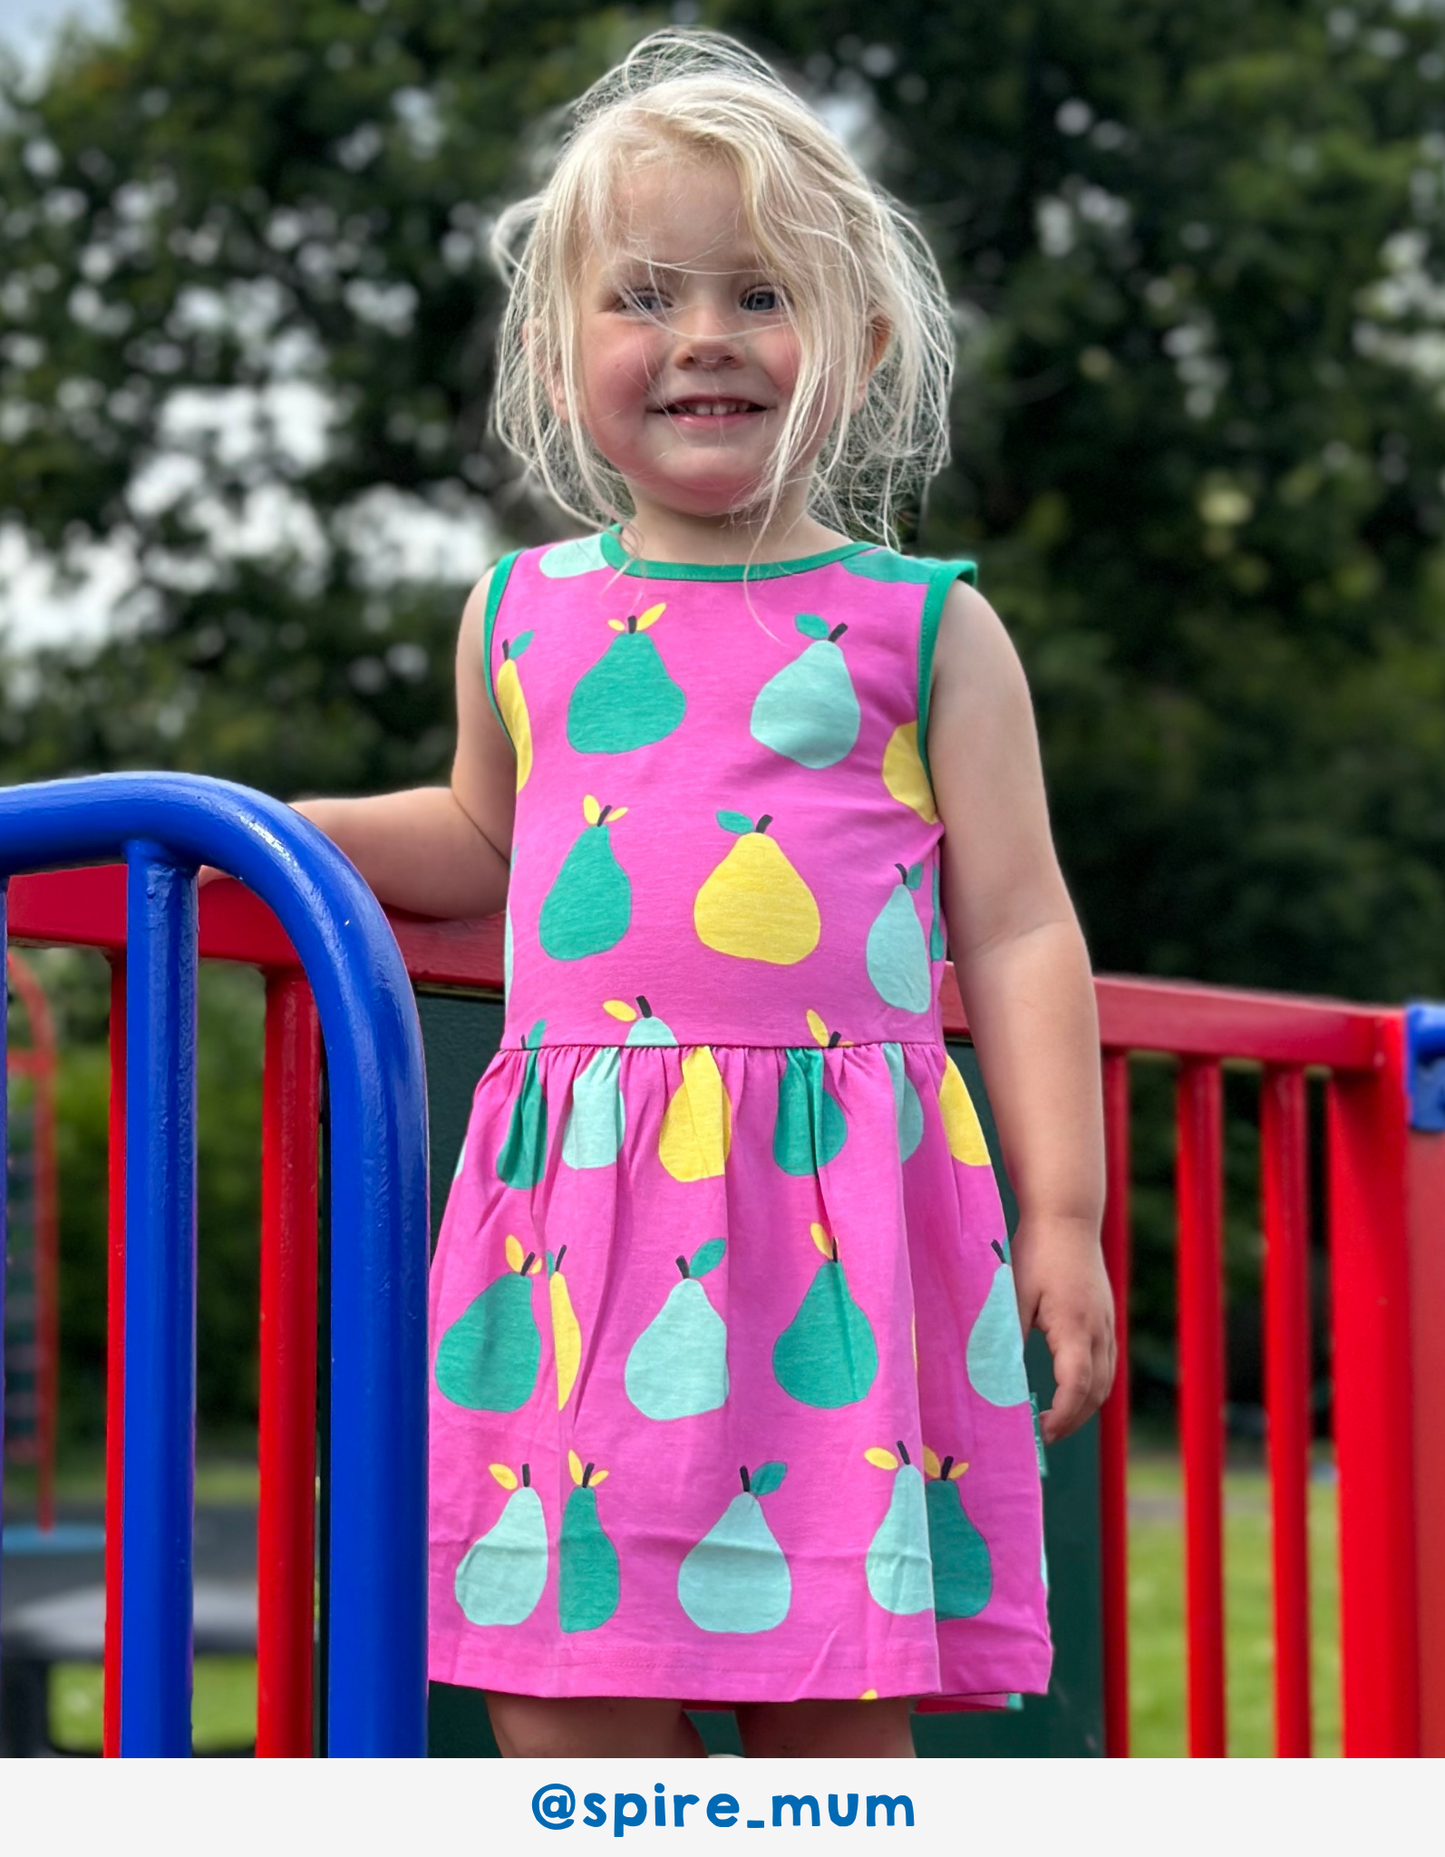 Organic cotton summer dress with pear print